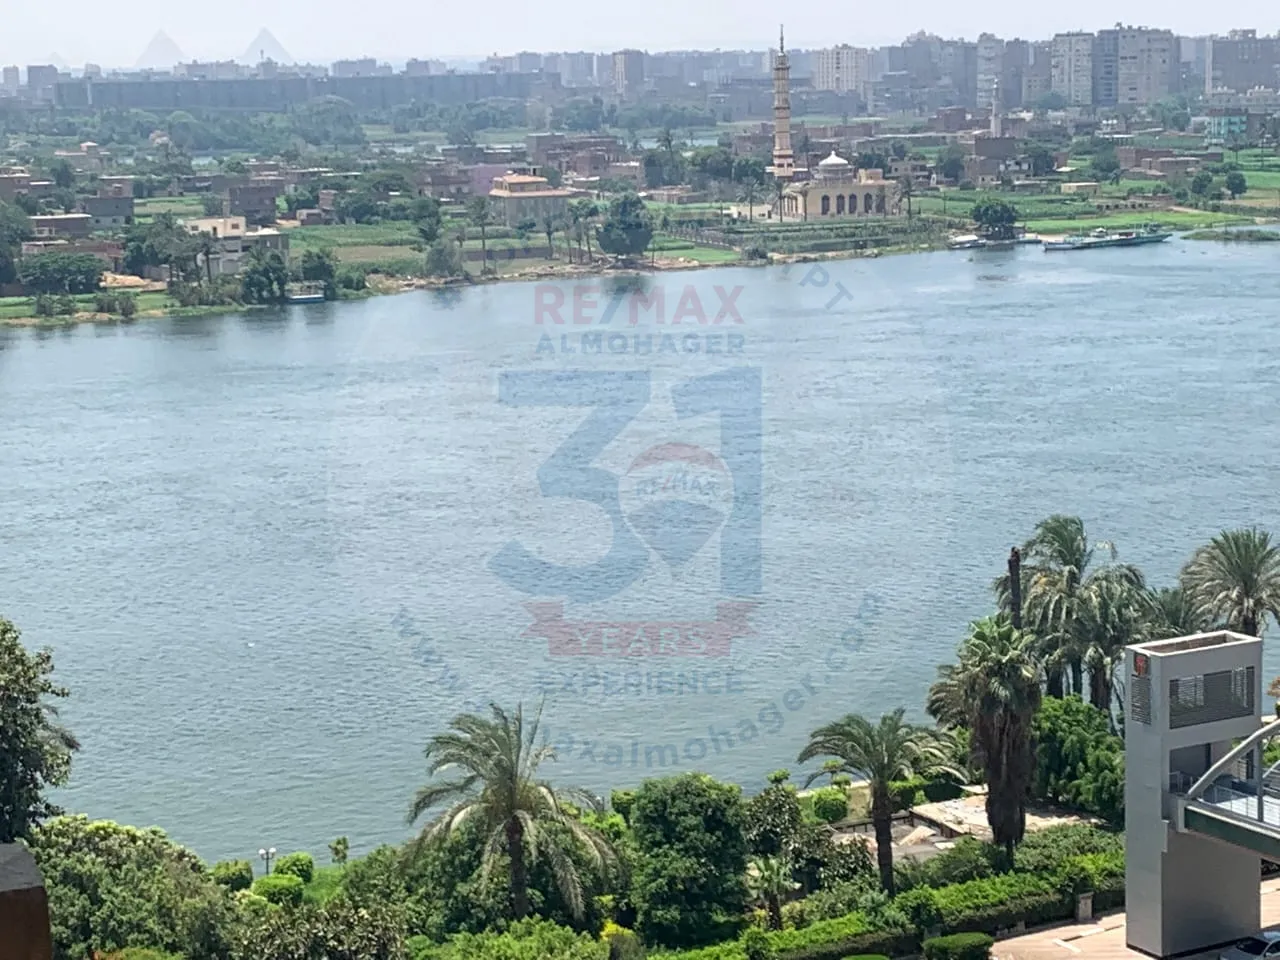 Apartment for sale directly on the Nile in Maadi